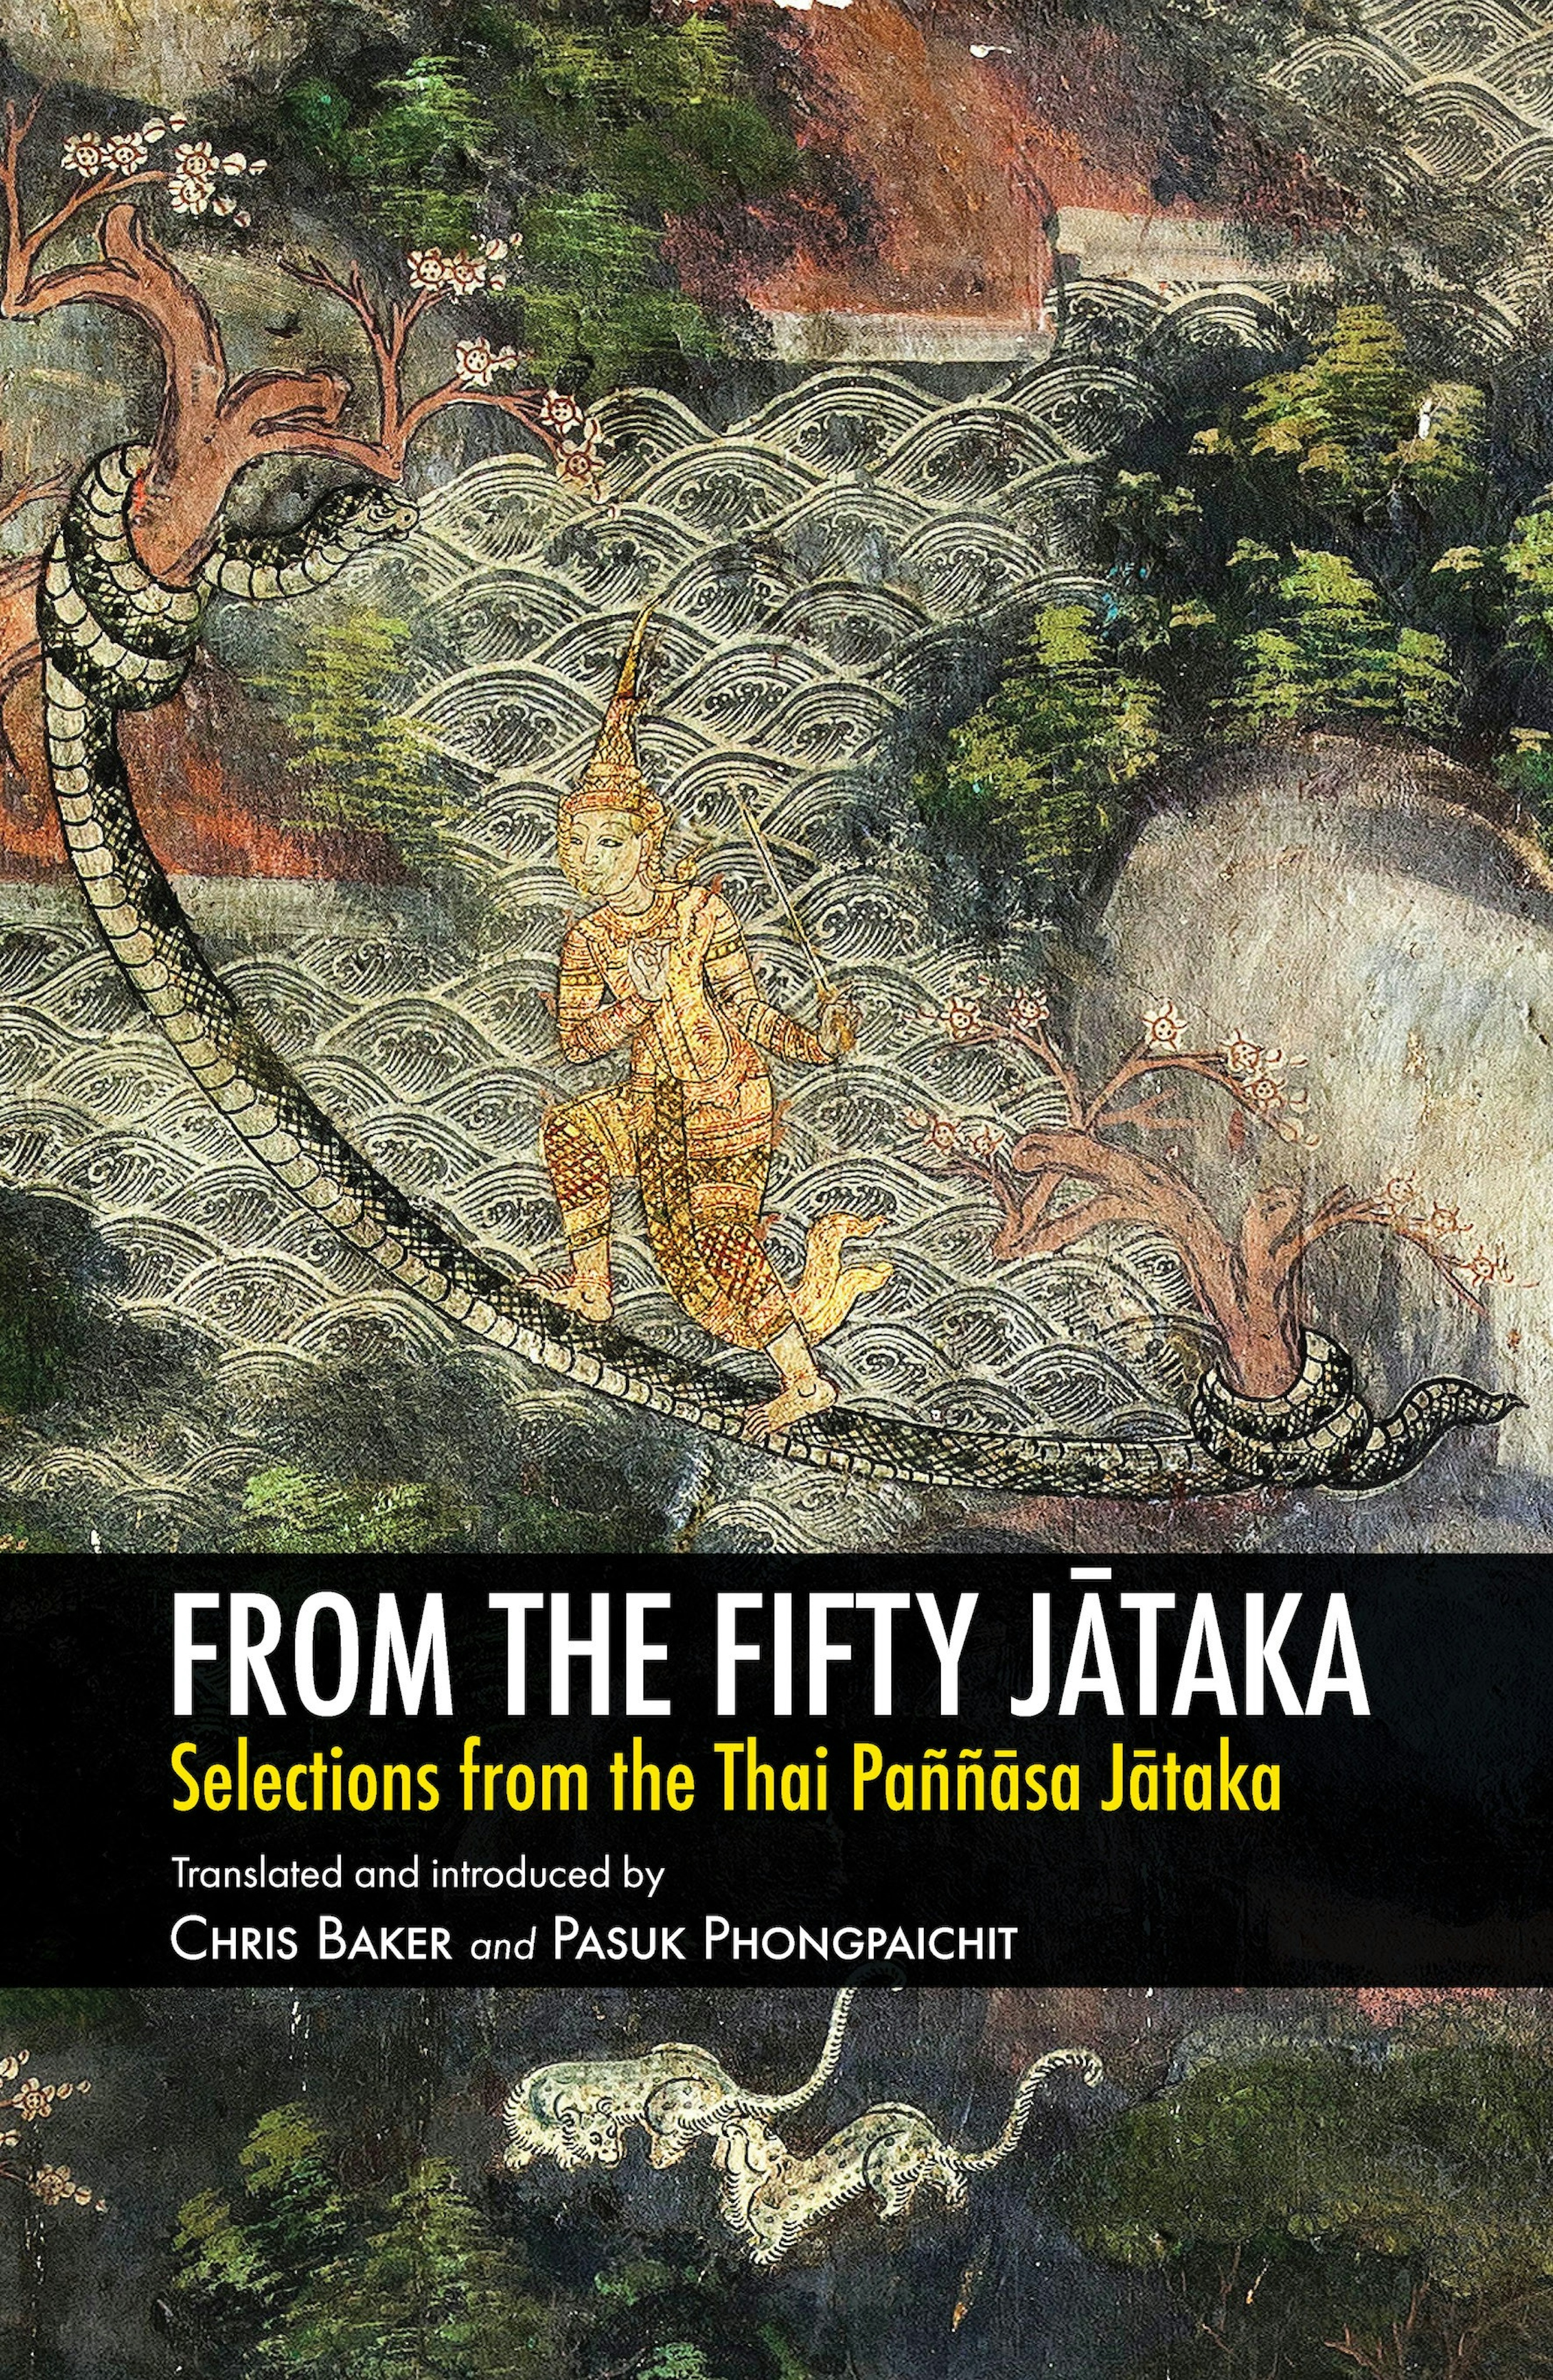 From the Fifty Jātaka